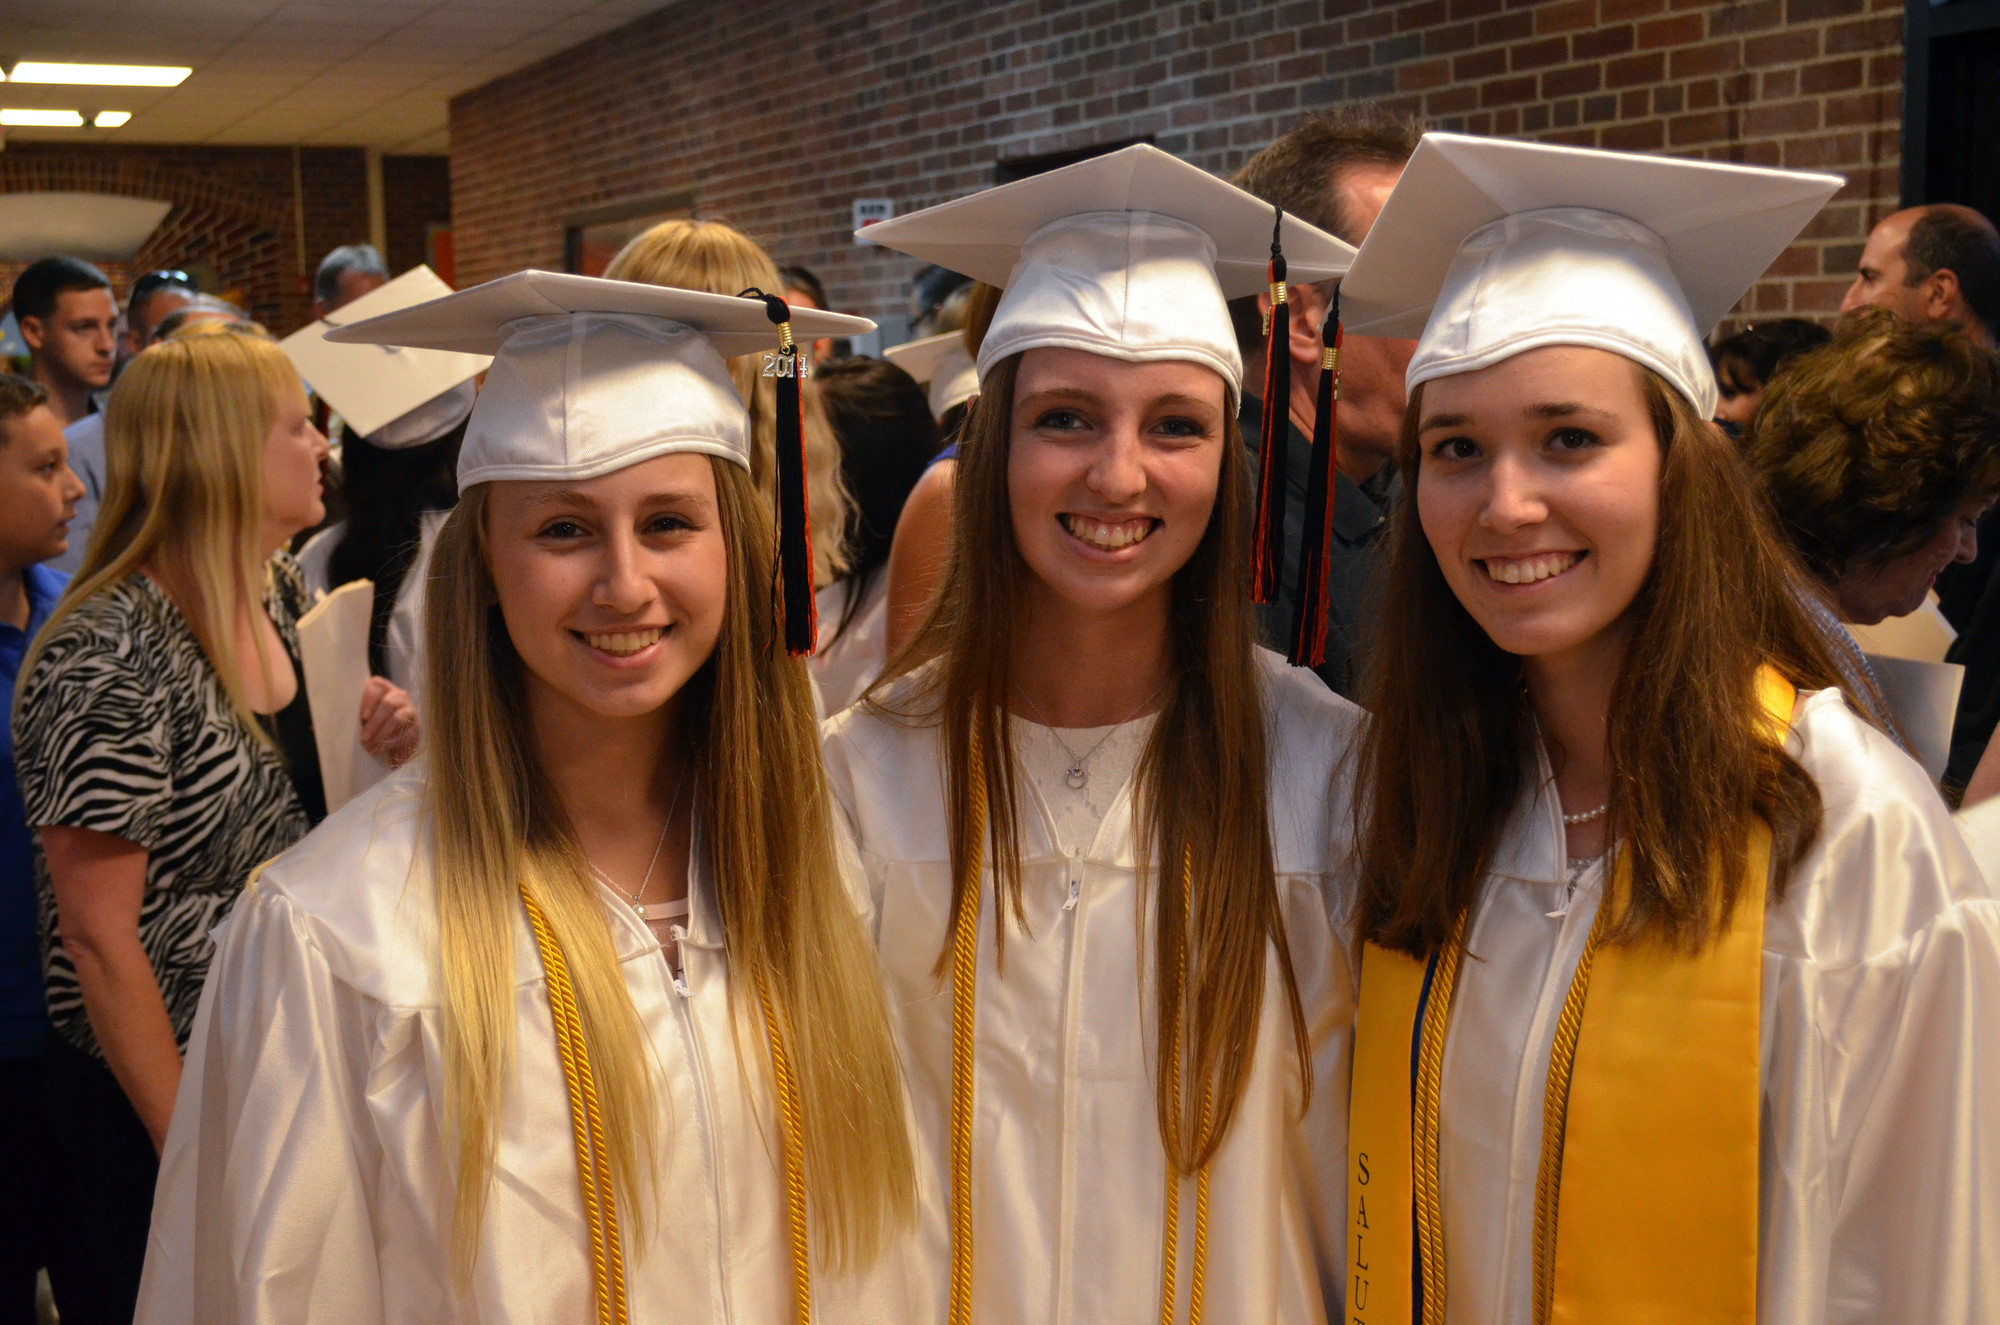 Graduating friends Katie Millar, Emily Galligan and Kate Nicoletti got together for a photo after the ceremony.